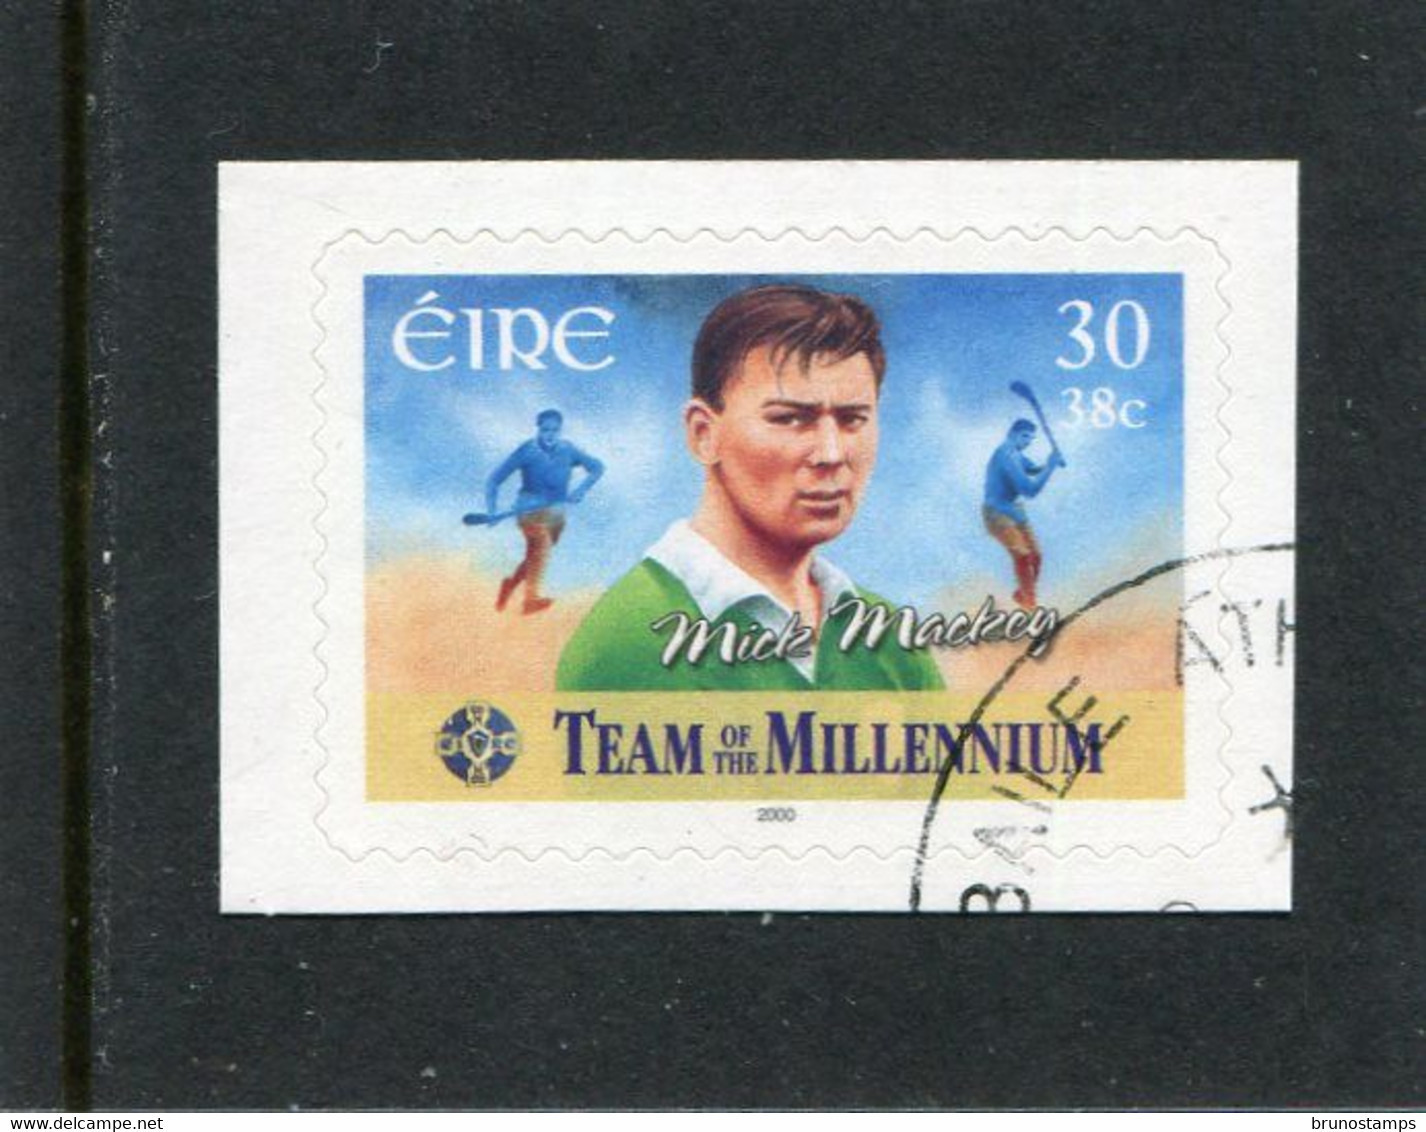 IRELAND/EIRE - 2000   30p  MICK MAKEY  SELF ADHESIVE   FINE USED - Used Stamps